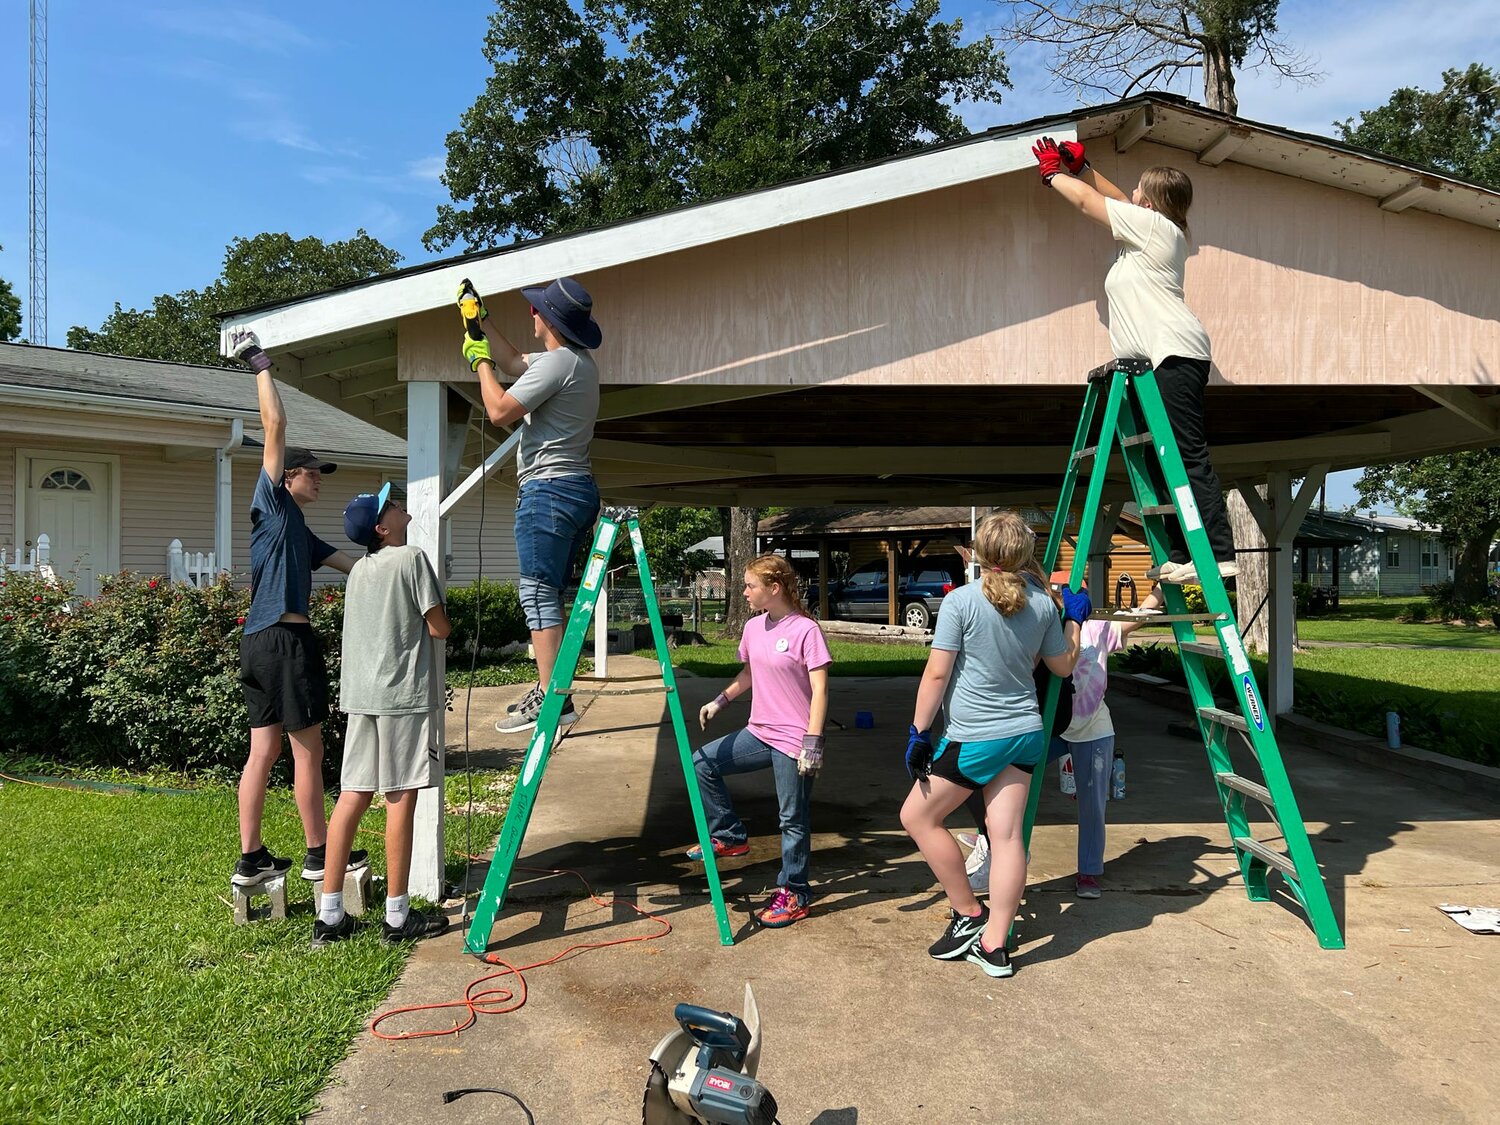 Among the home improvement projects undertaken by the UM Army in Wood County last week was repair work on this carport in Alba.